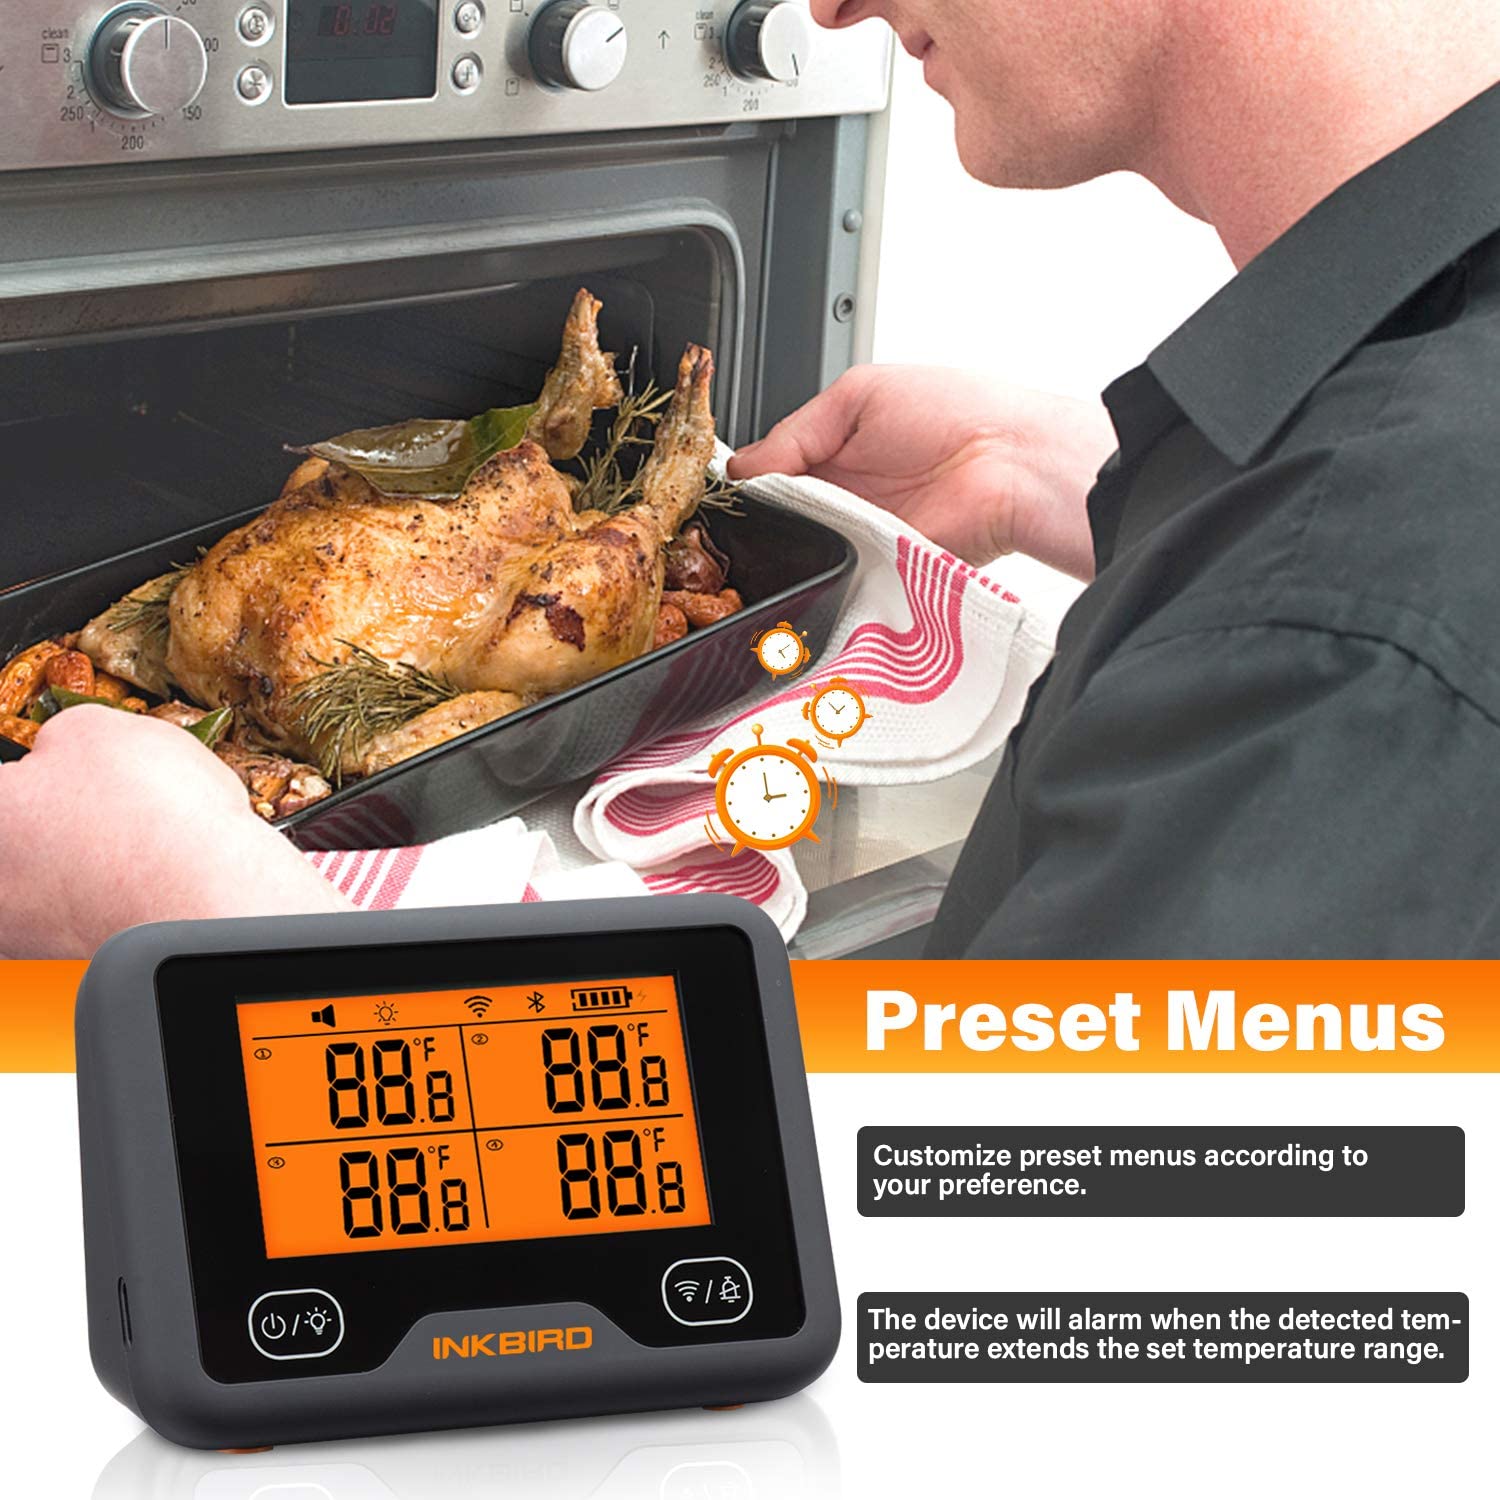 Inkbird Wi-Fi&Bluetooth Grill Thermometer IBBQ-4BW, Wireless Meat Thermometer with 4 Probes, Wifi Meat Grill Thermometer - image 4 of 7